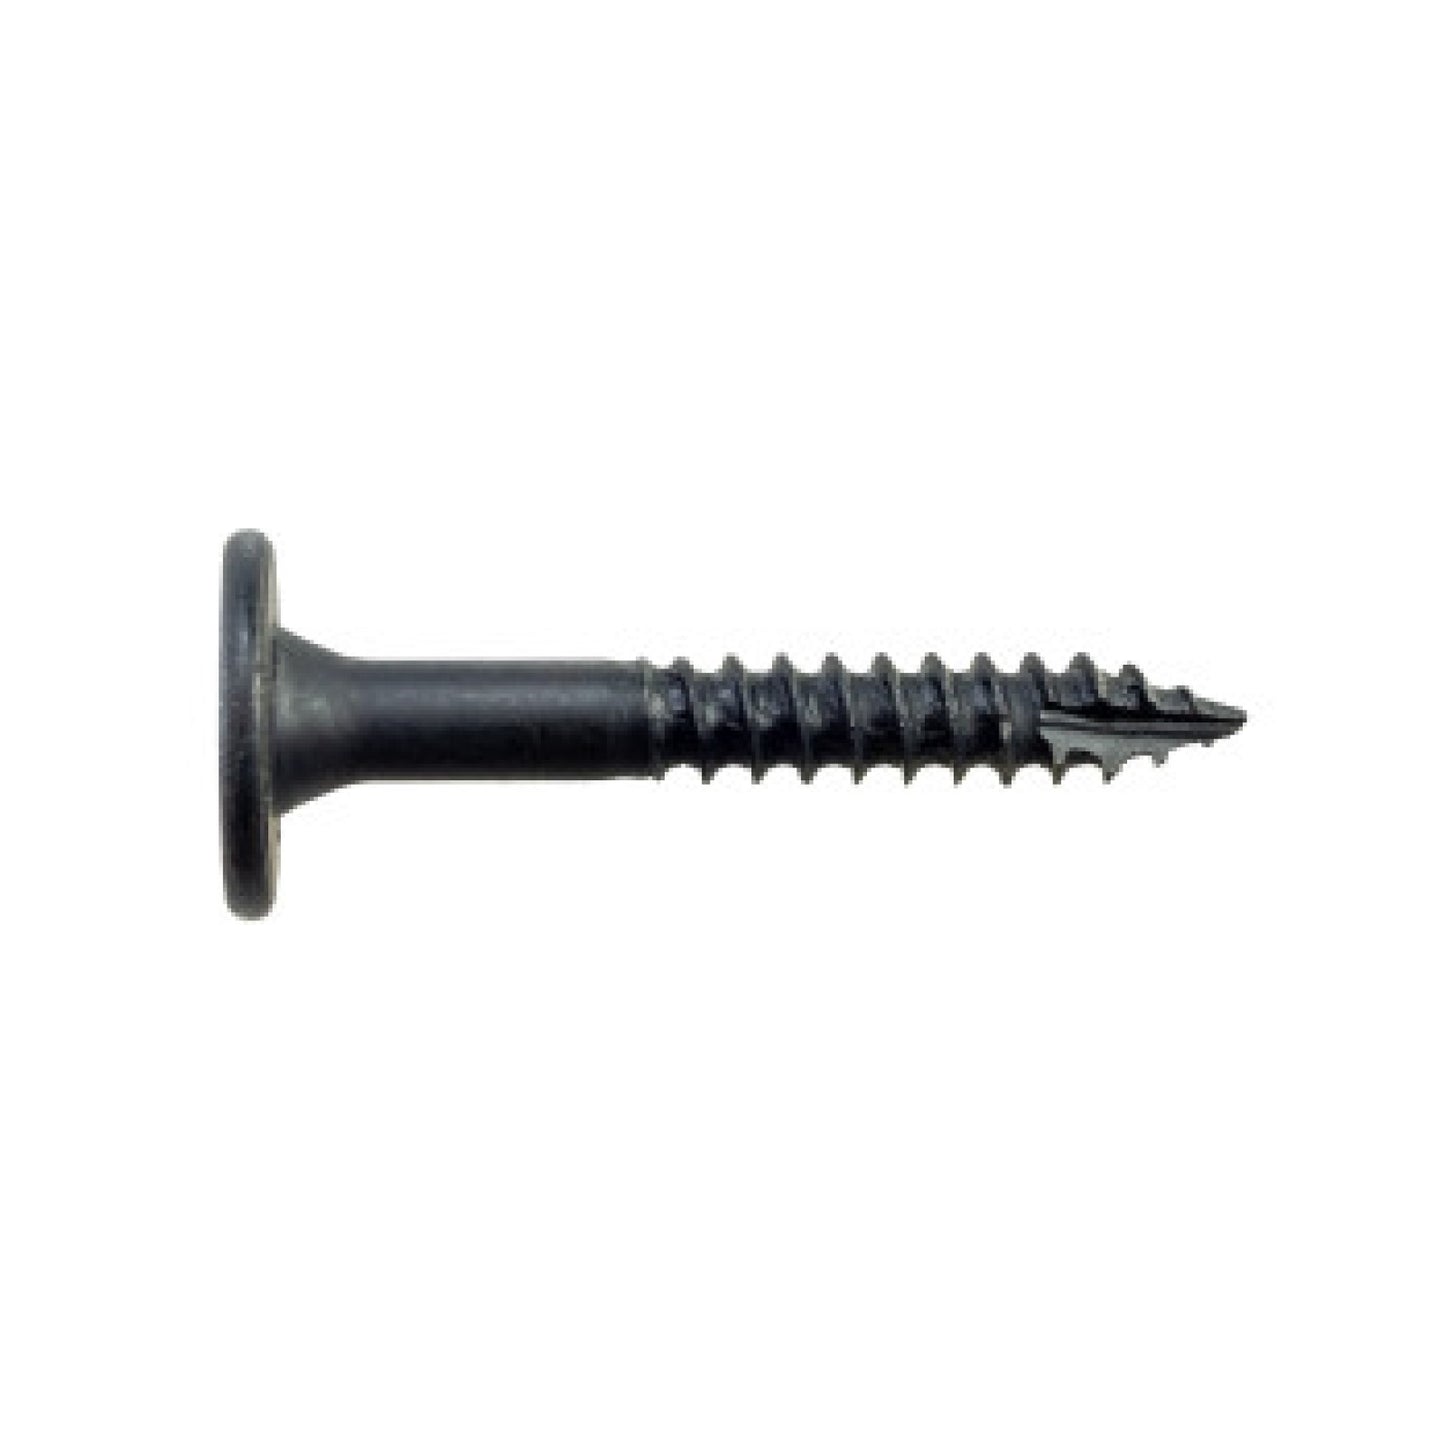 0.250" x 2" Strong-Tie SDWS25200DBBRC12 Structural Screw T40 Star - Double Barrier Black Coating, Pkg 12